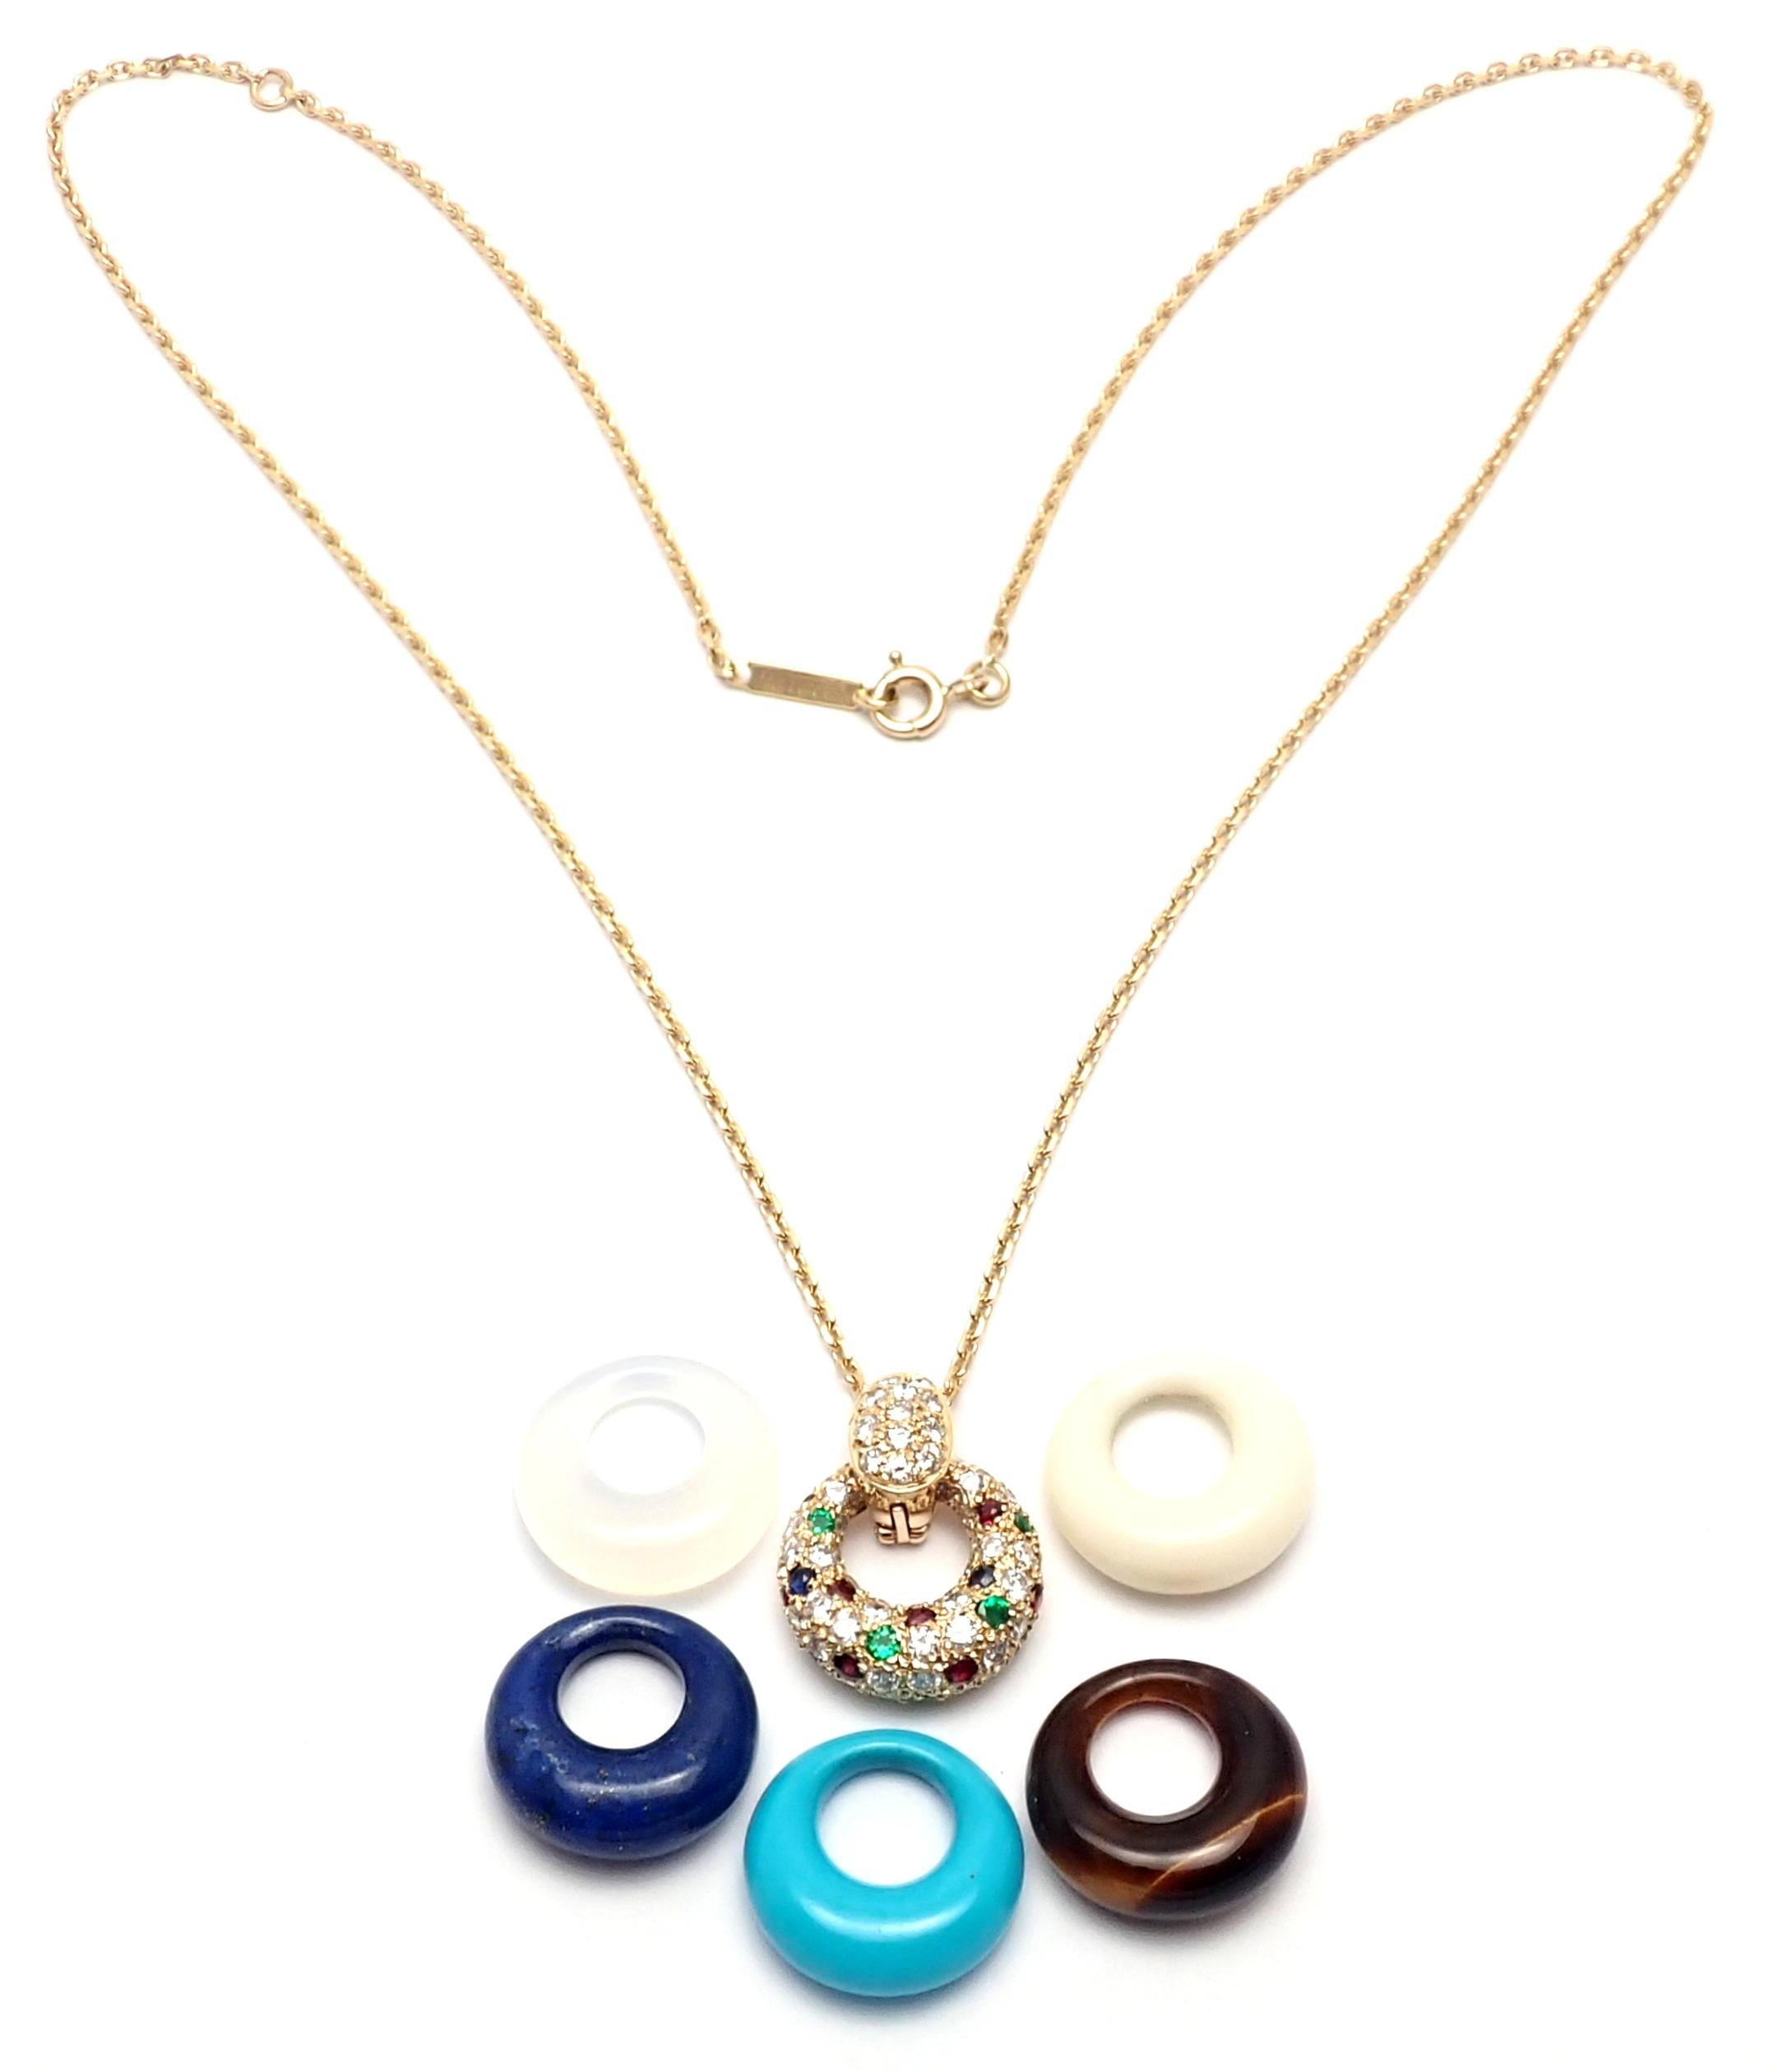 18k Yellow Gold Diamond Ruby Emerald Sapphire Lapis Turquoise Mother of Pearl Tiger Eye Rock Crystal Pendant Necklace.
This necklace comes with 6 interchangeable pendants.
With 6 round brilliant cut diamonds VVS1 clarity, E color total weight